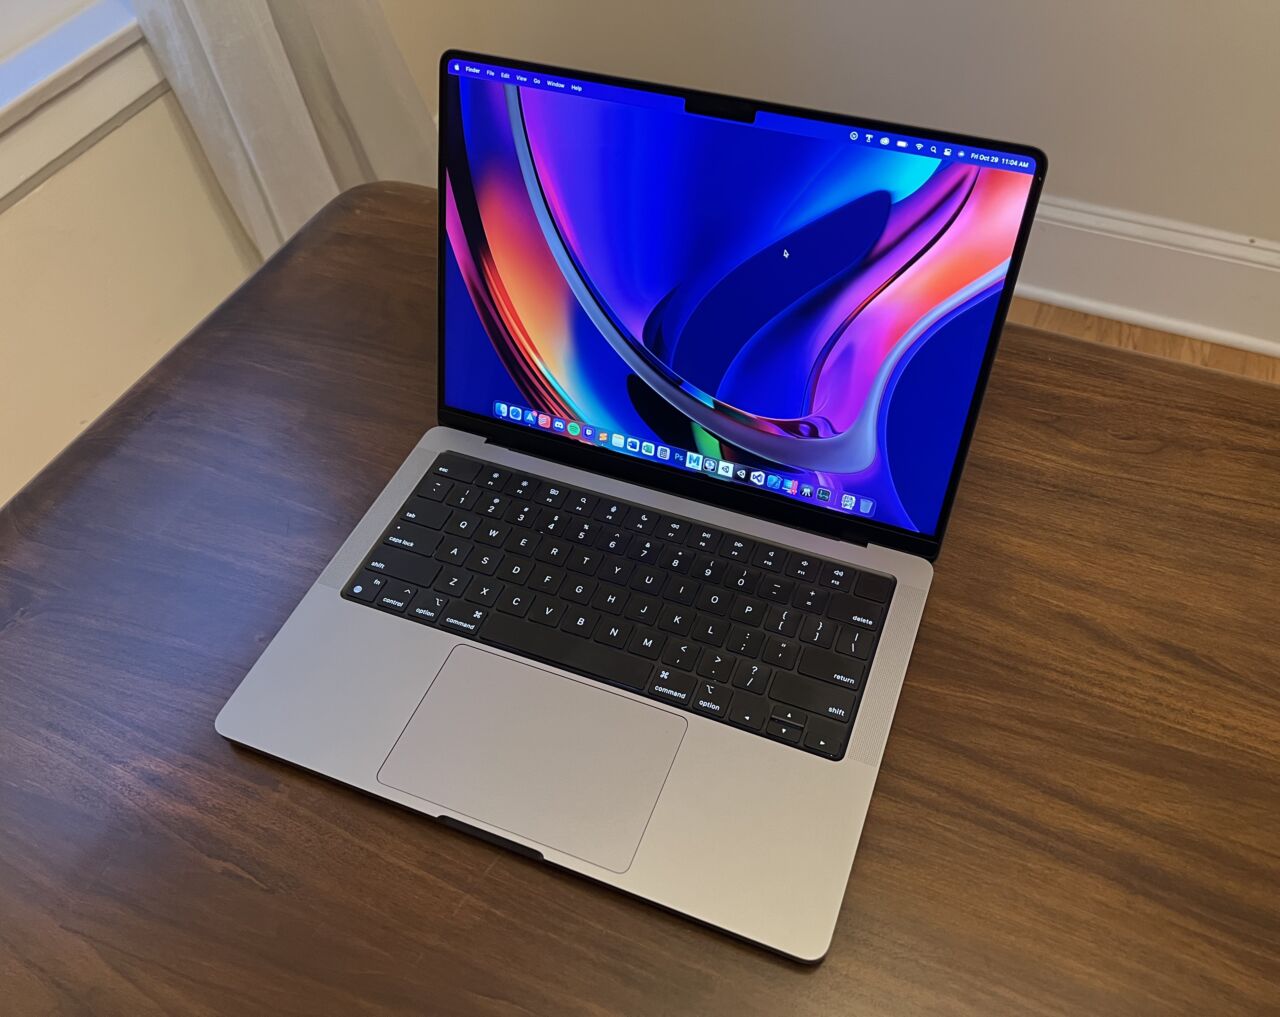 The display on the 2021 14-inch MacBook Pro.